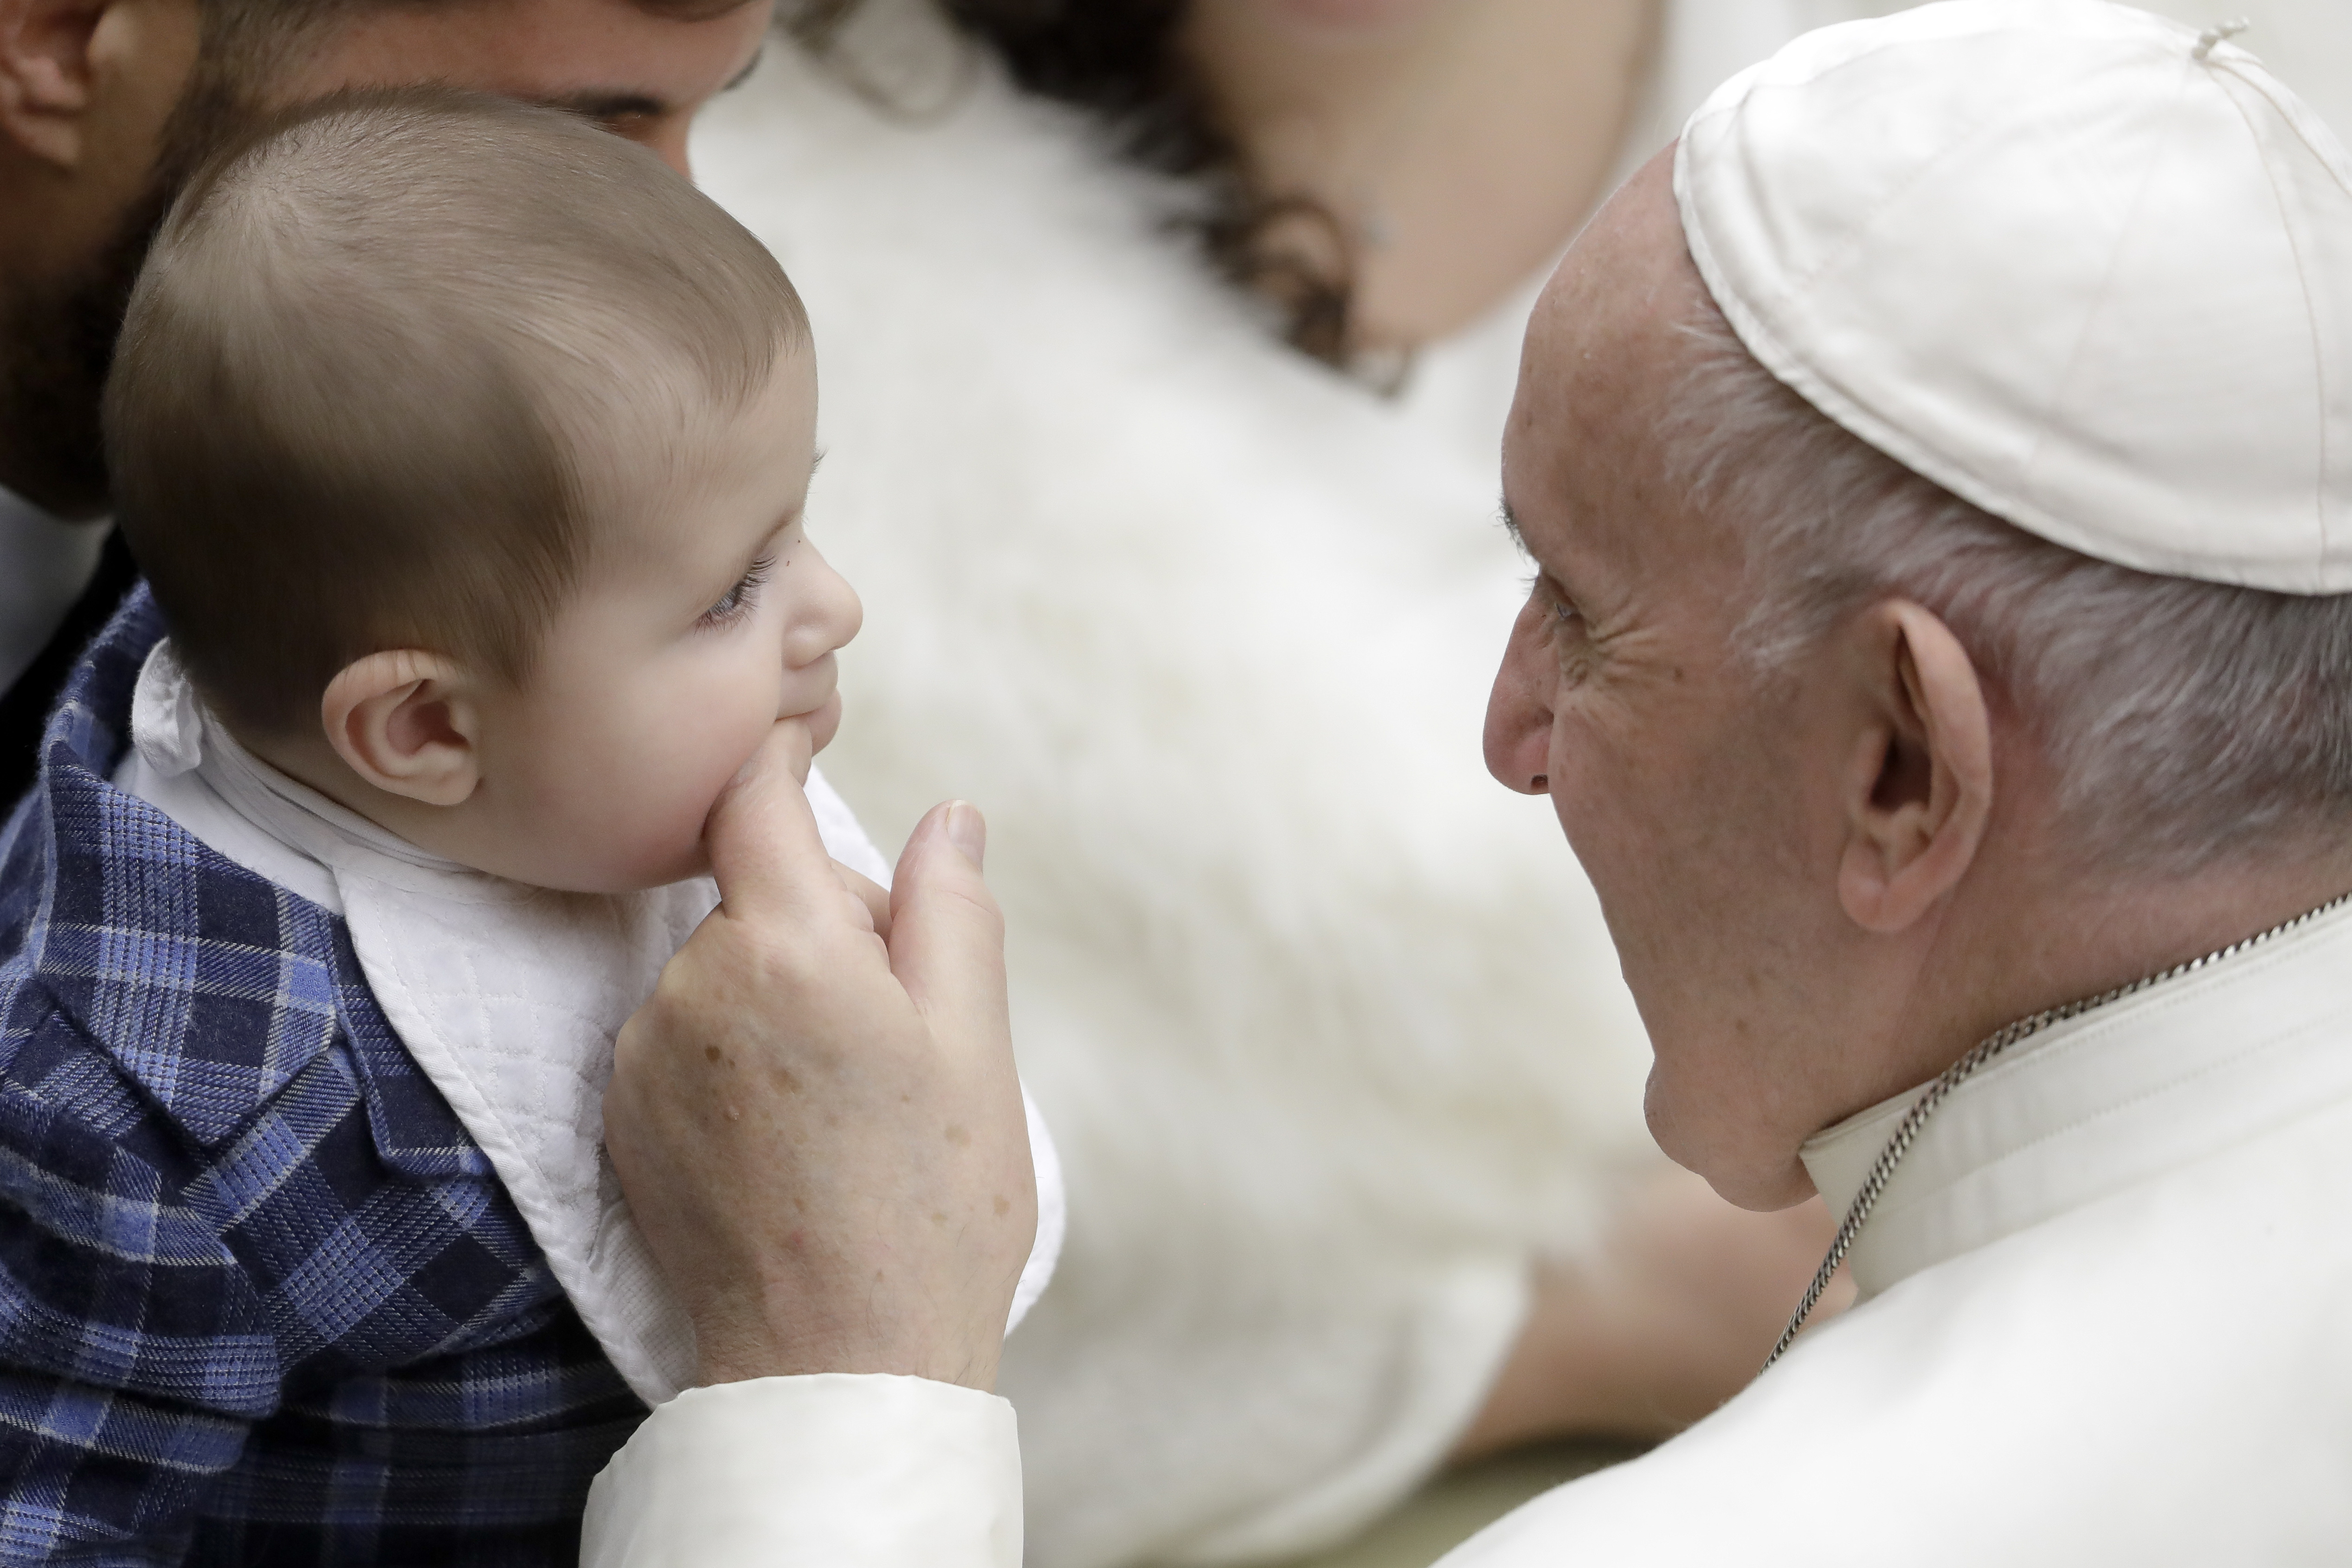 Pope urges politicians to defend rights of the unborn